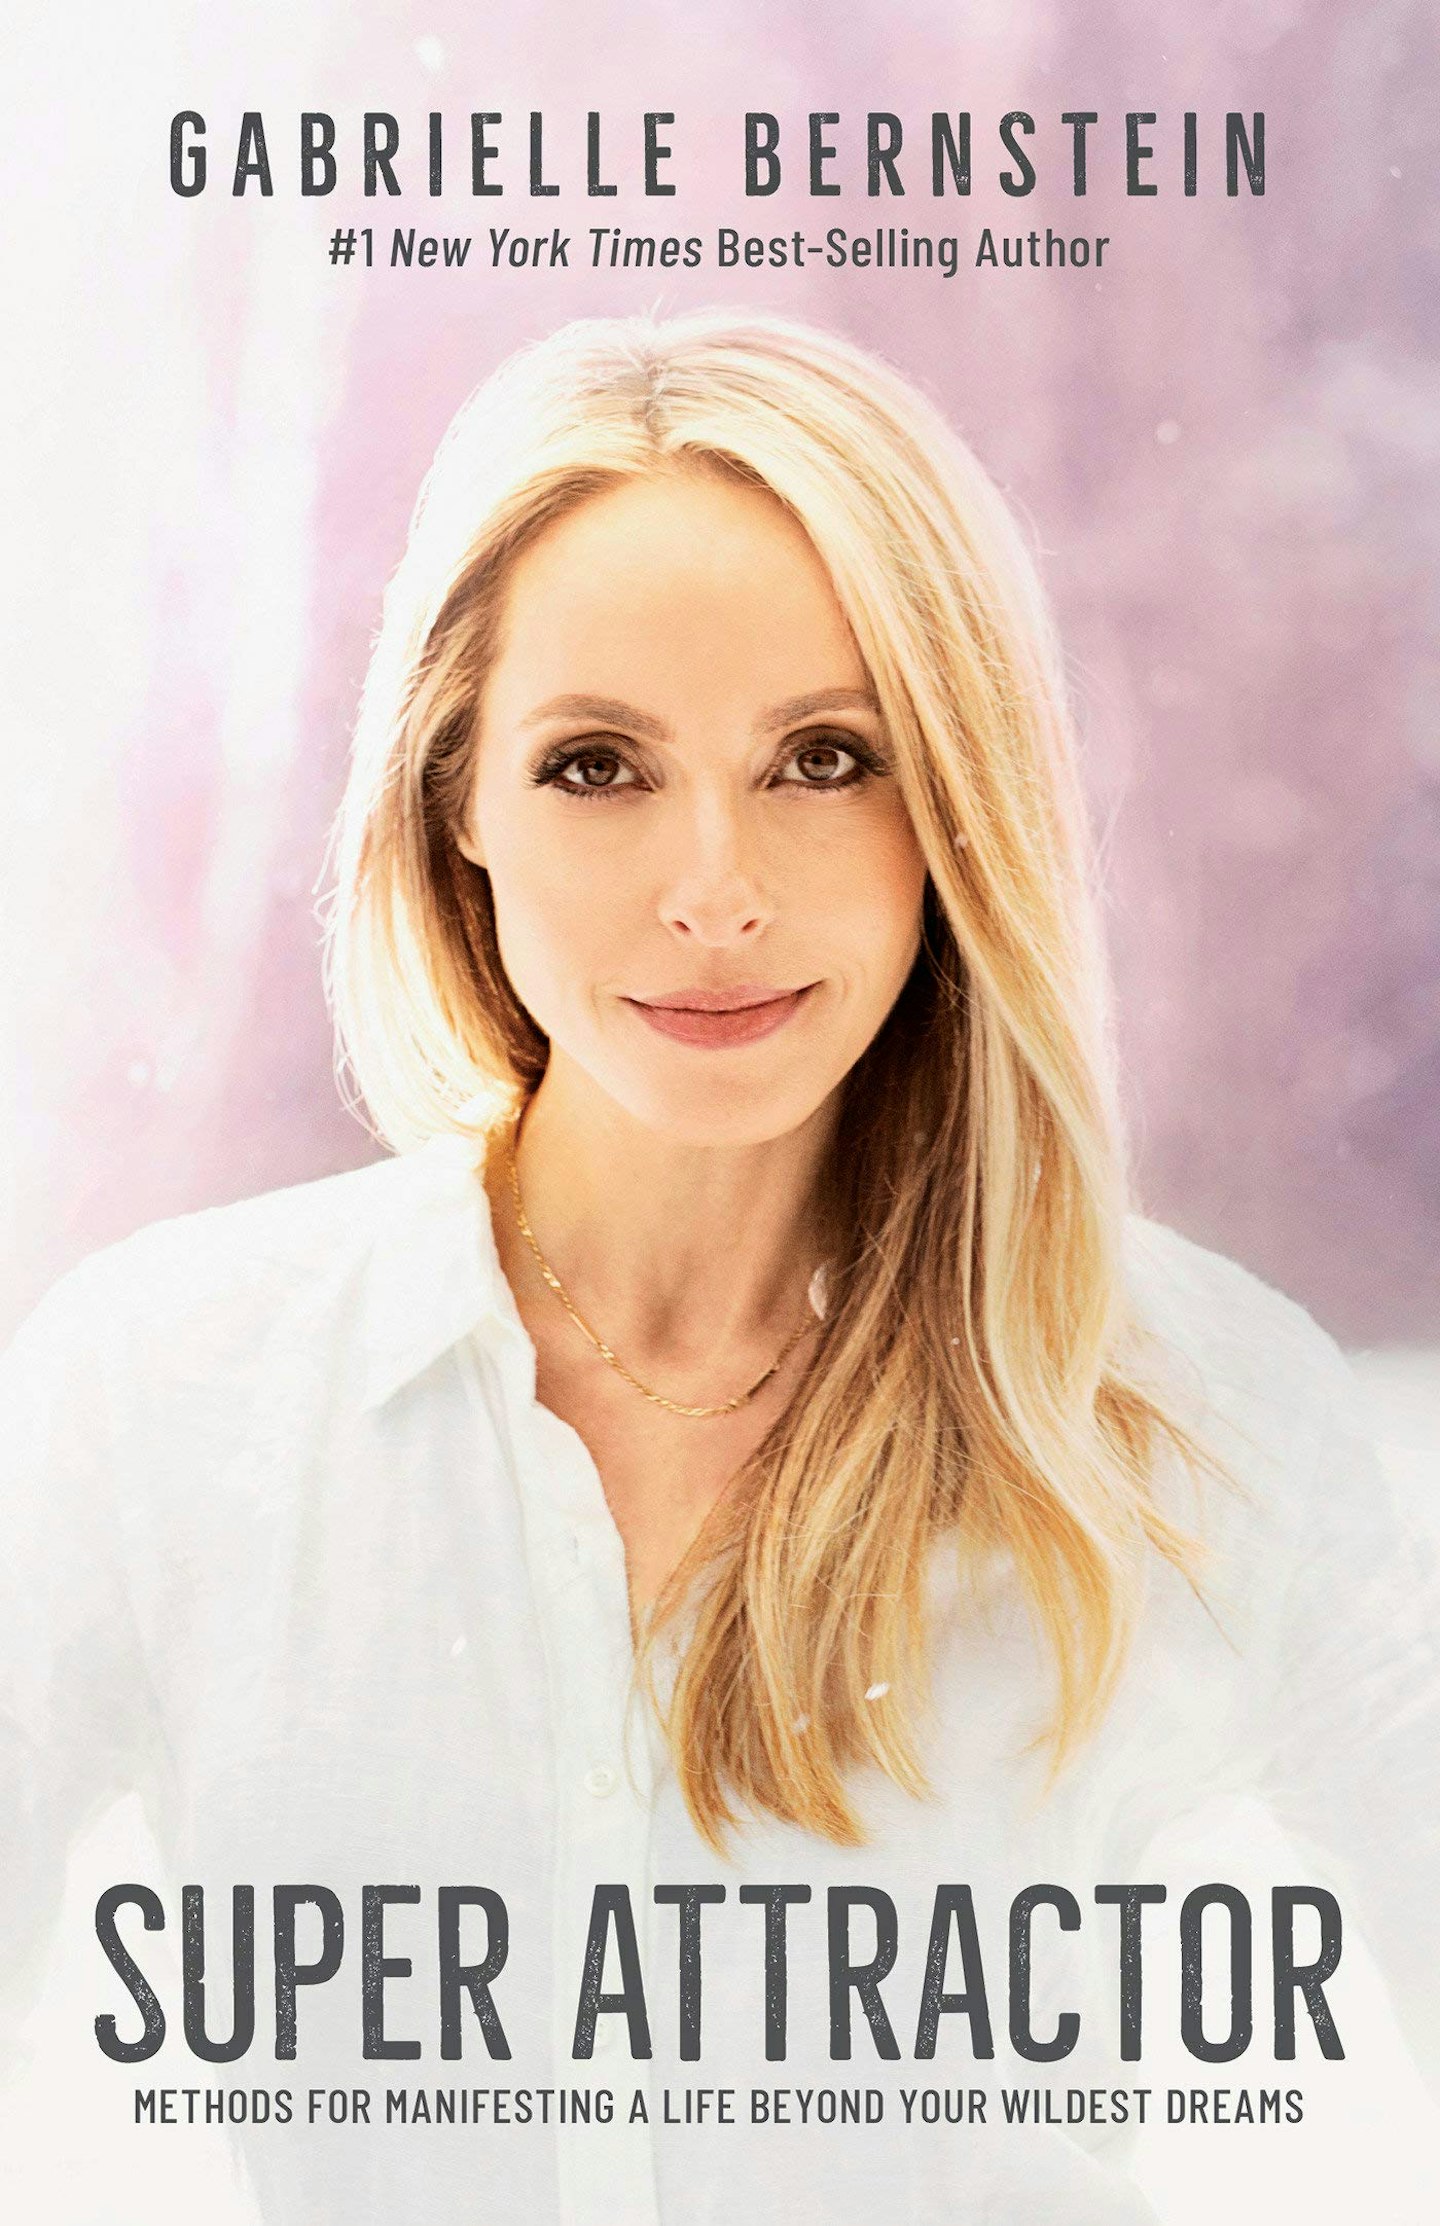 Super Attractor: Methods for Manifesting a Life beyond Your Wildest Dreams, by Gabrielle Bernstein